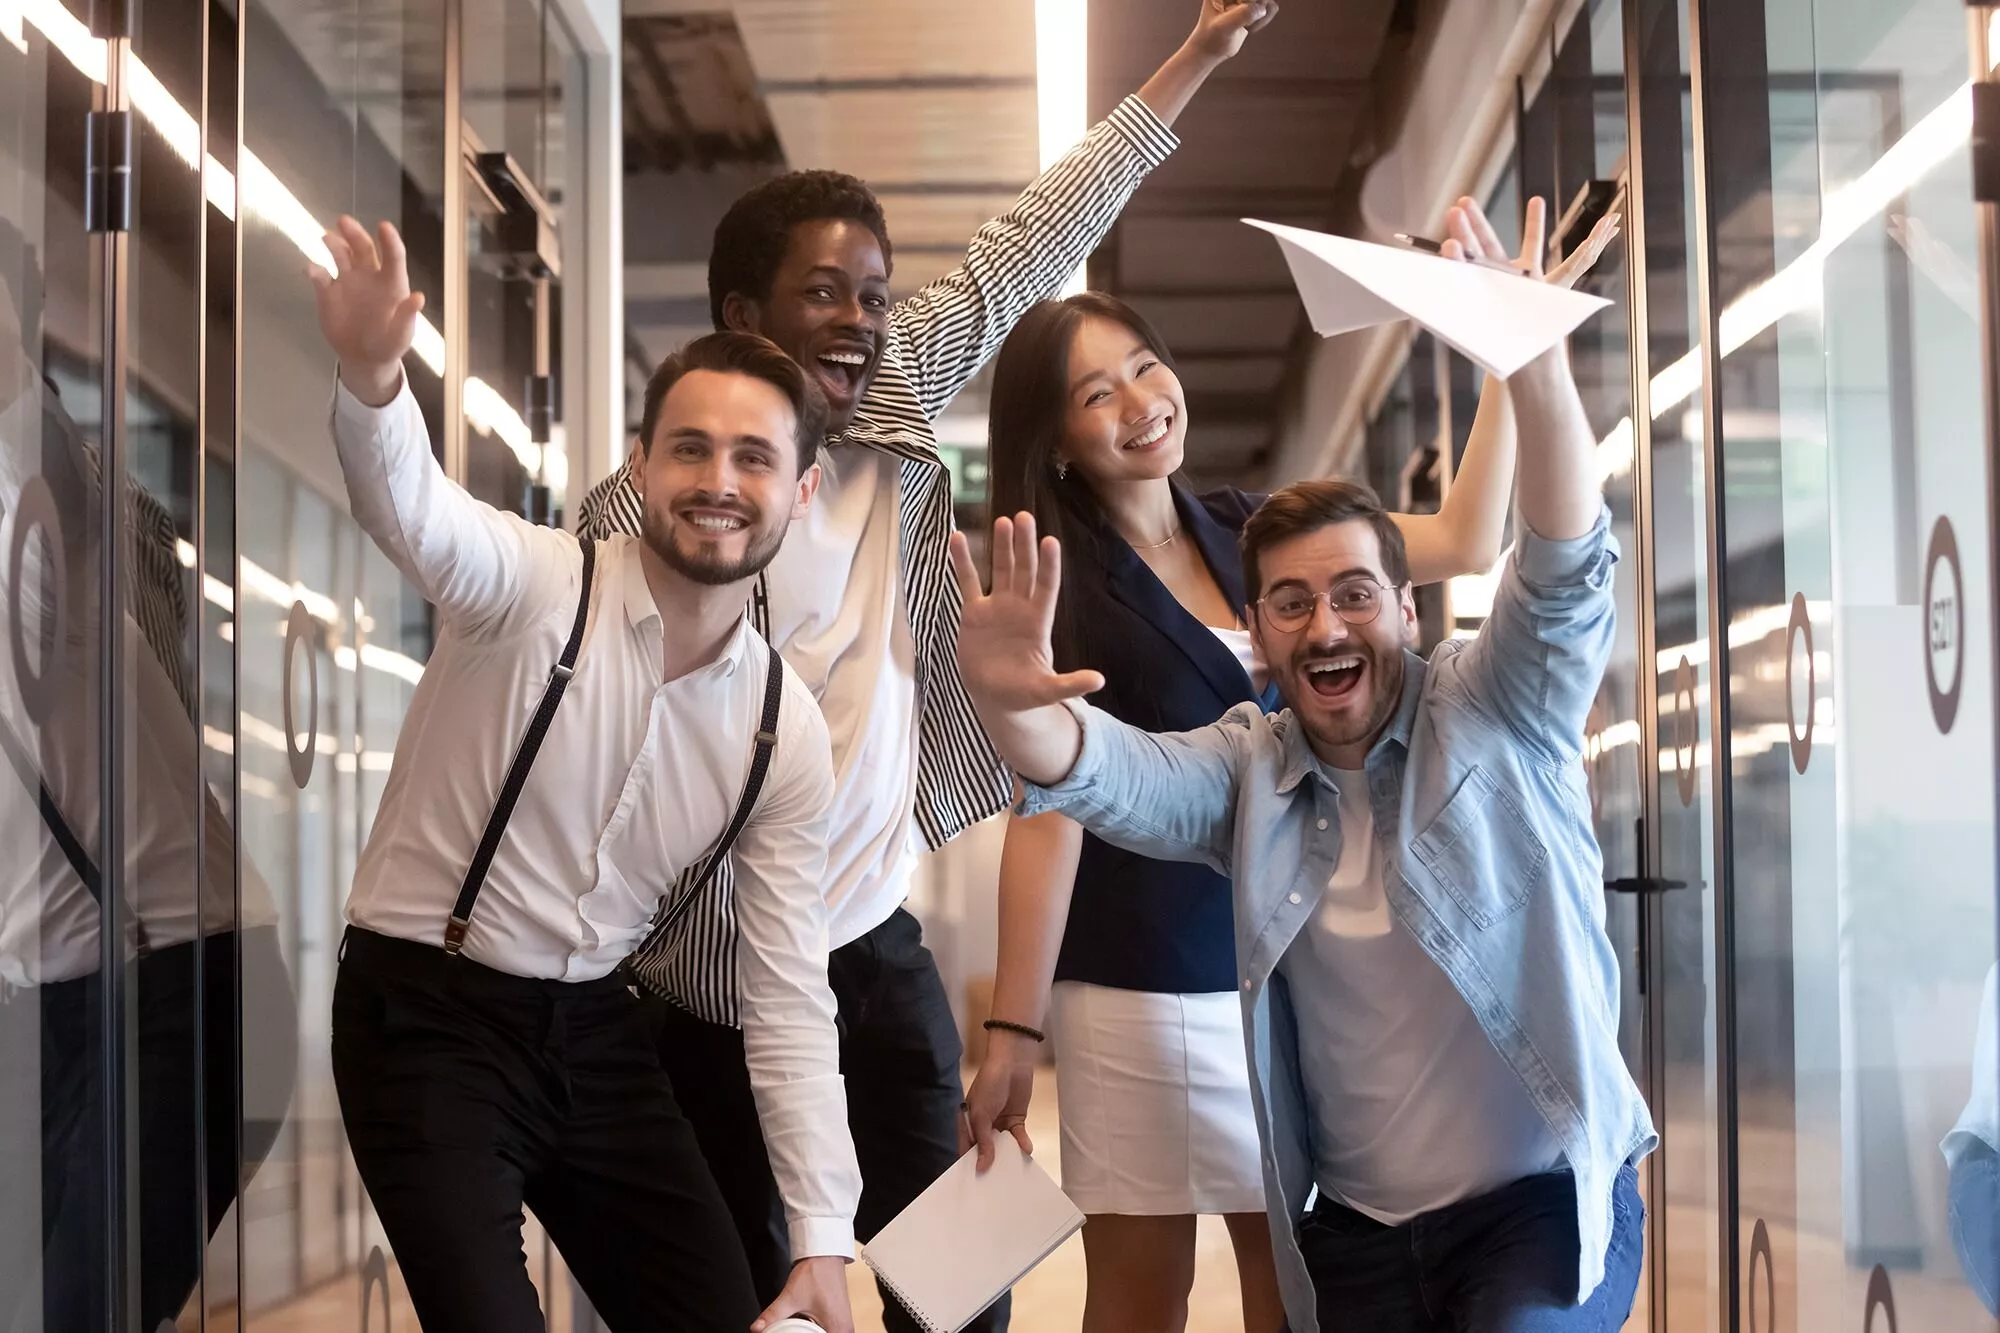 A cheerful group of four diverse office colleagues celebrating a success with raised arms and paper airplanes, in a modern office setting.